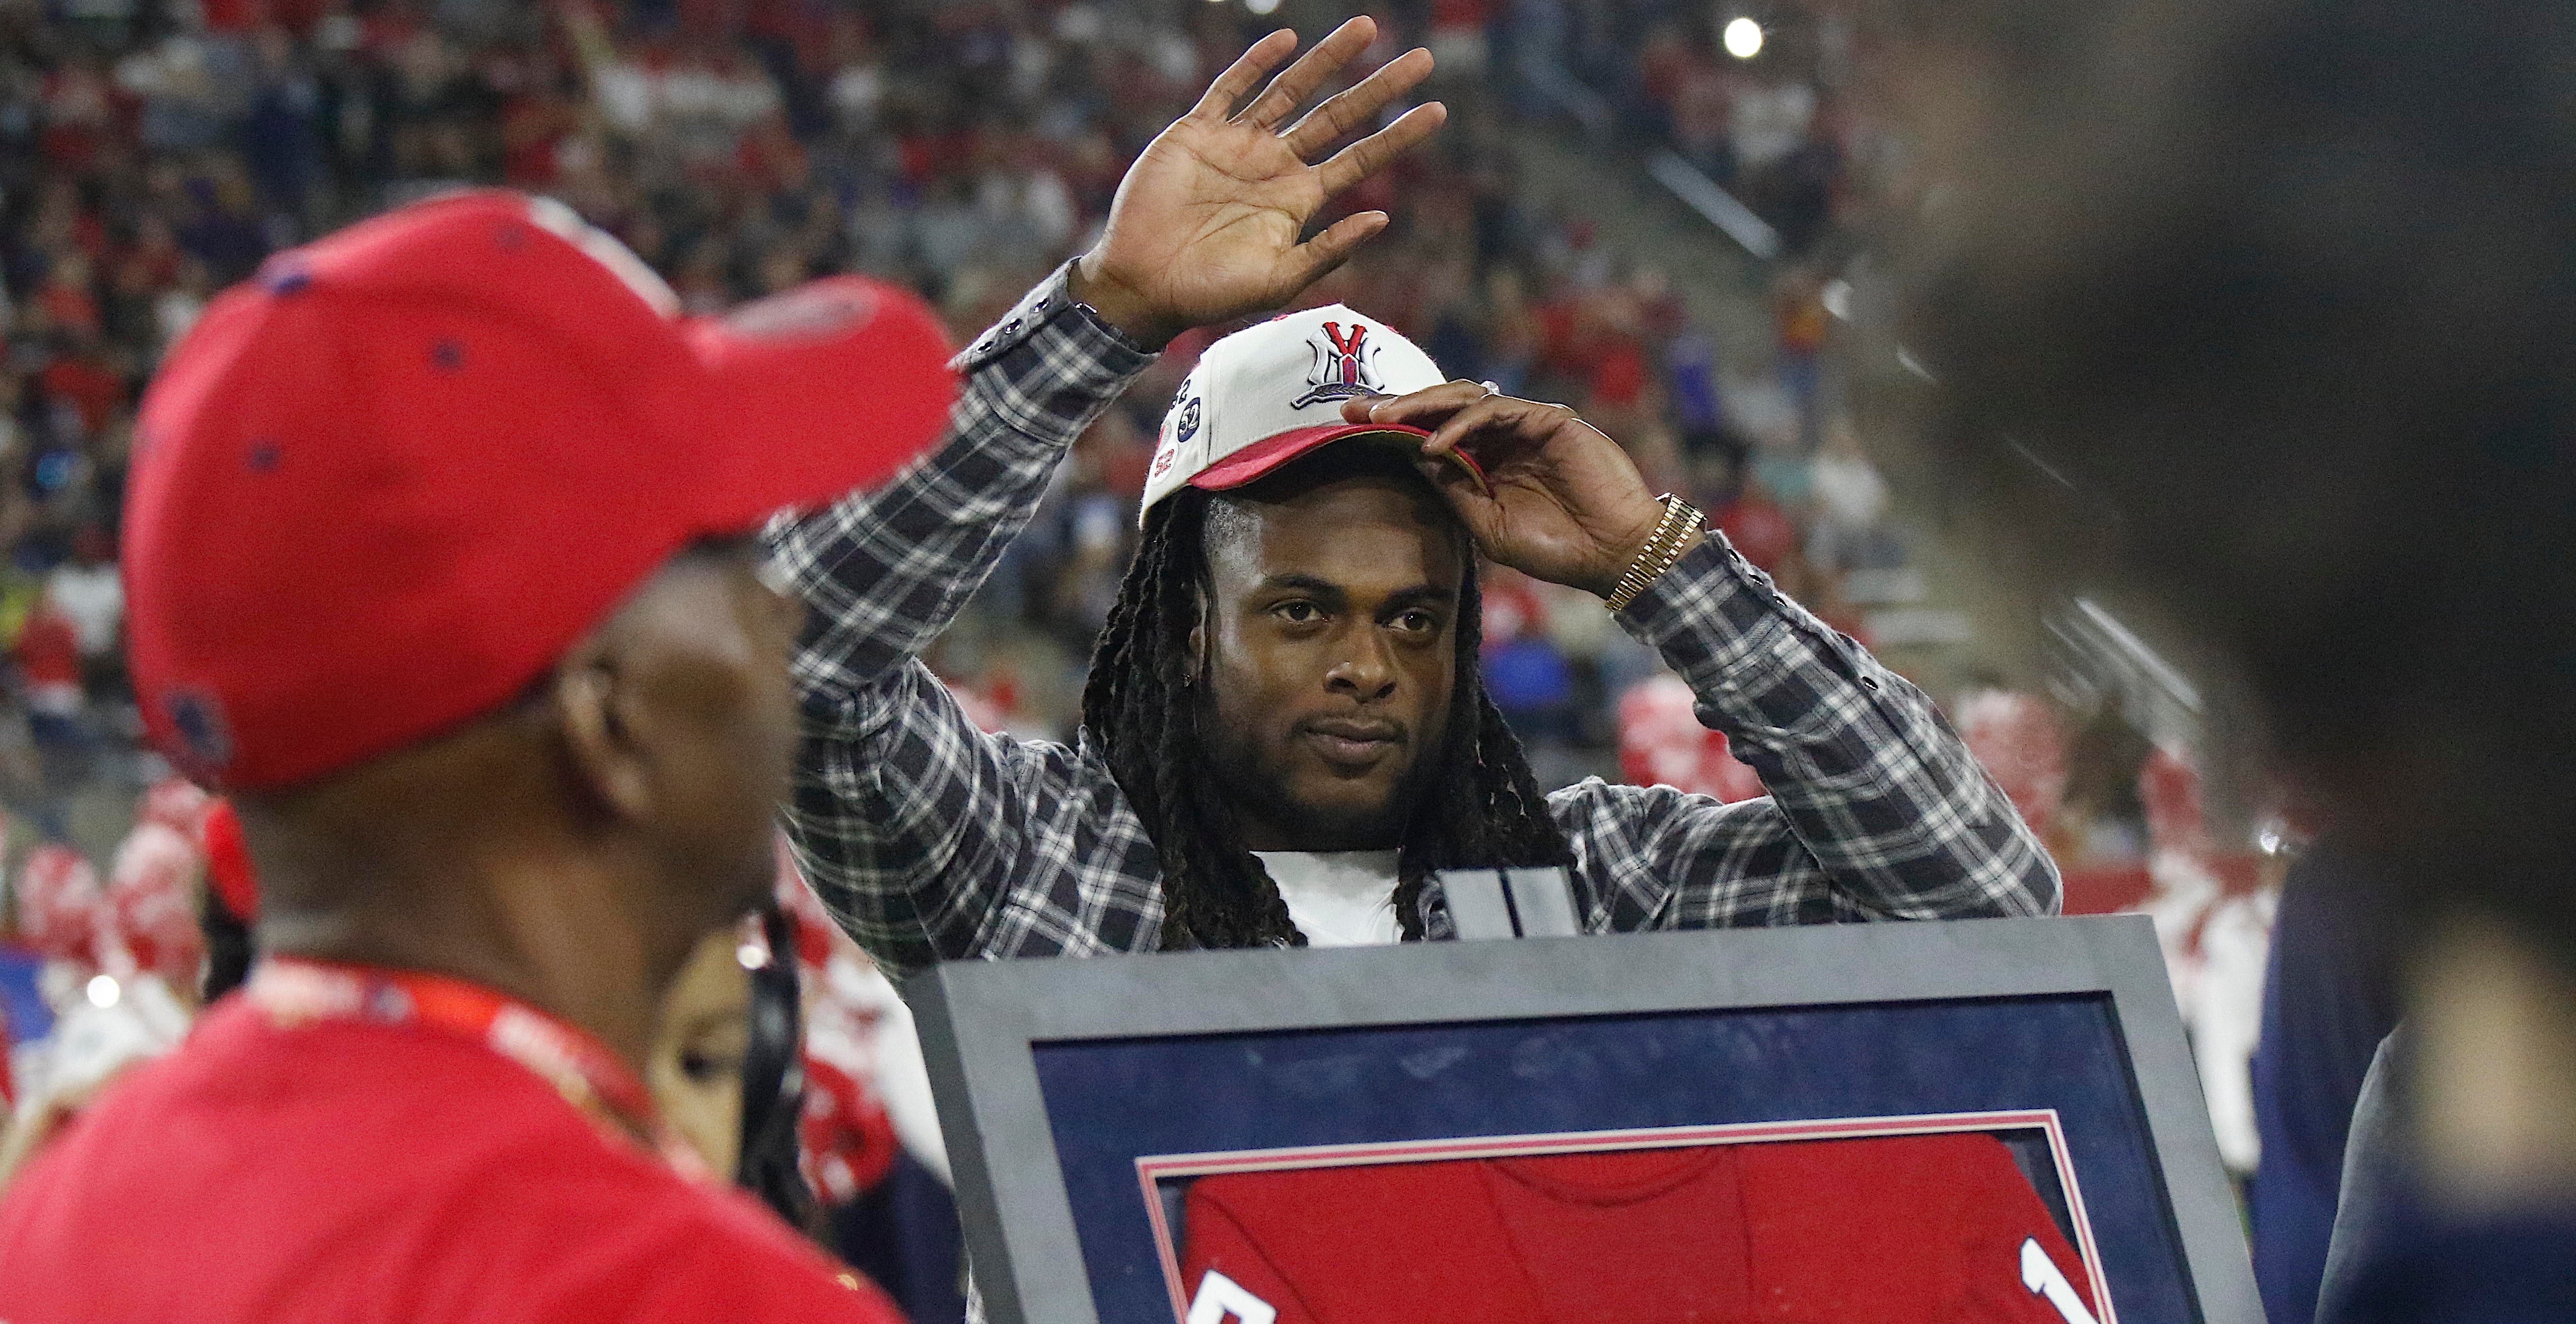 Davante Adams' jersey to be retired by Fresno State